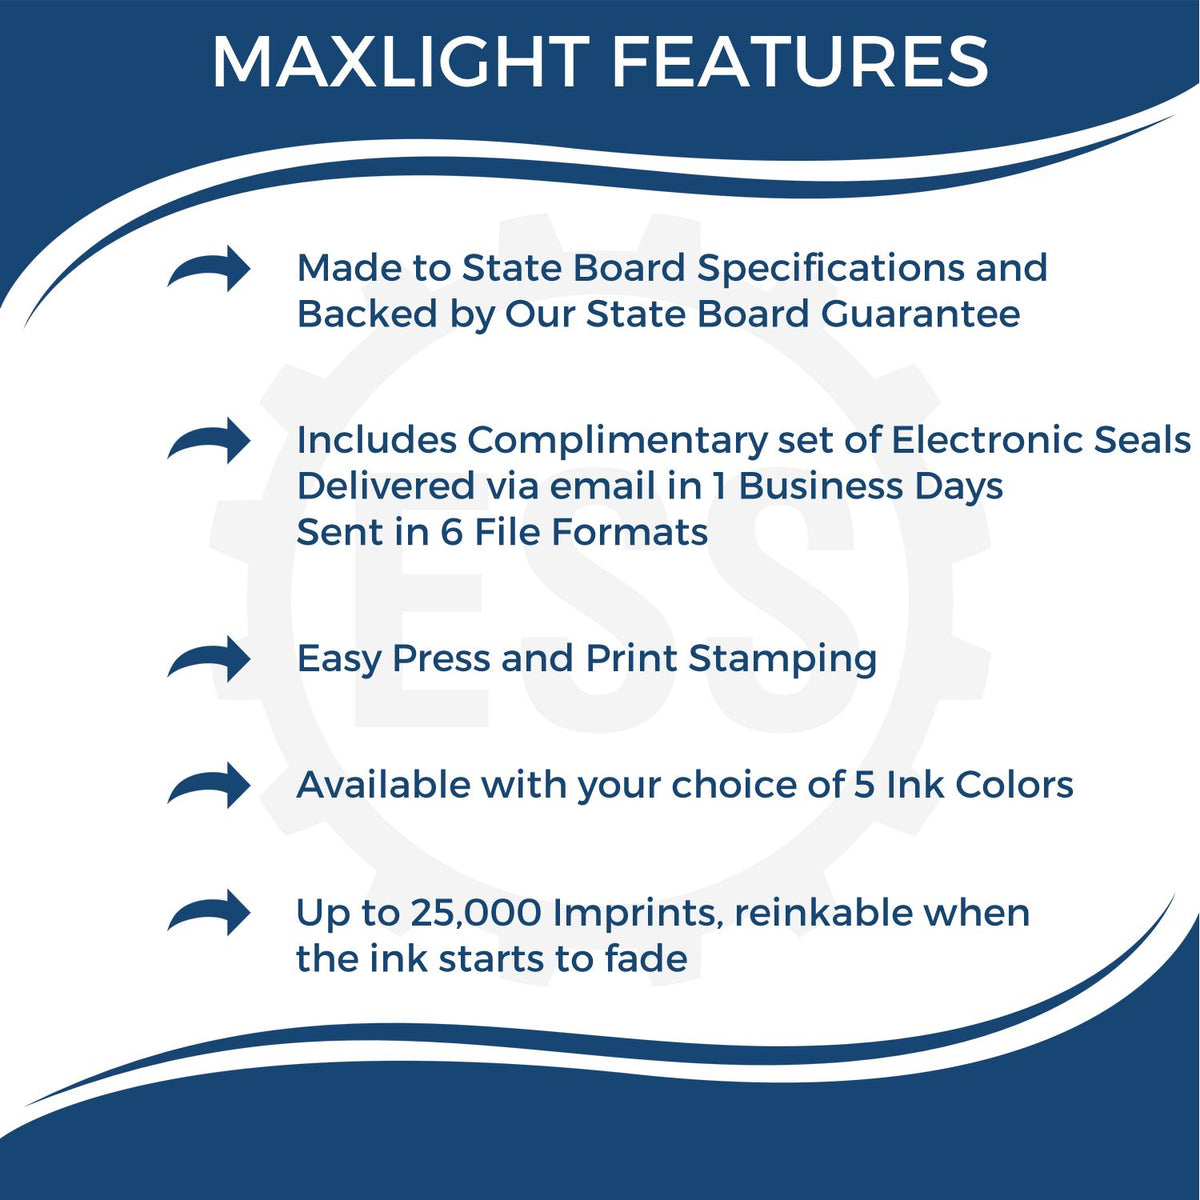 A picture of an infographic highlighting the selling points for the Premium MaxLight Pre-Inked Kansas Geology Stamp